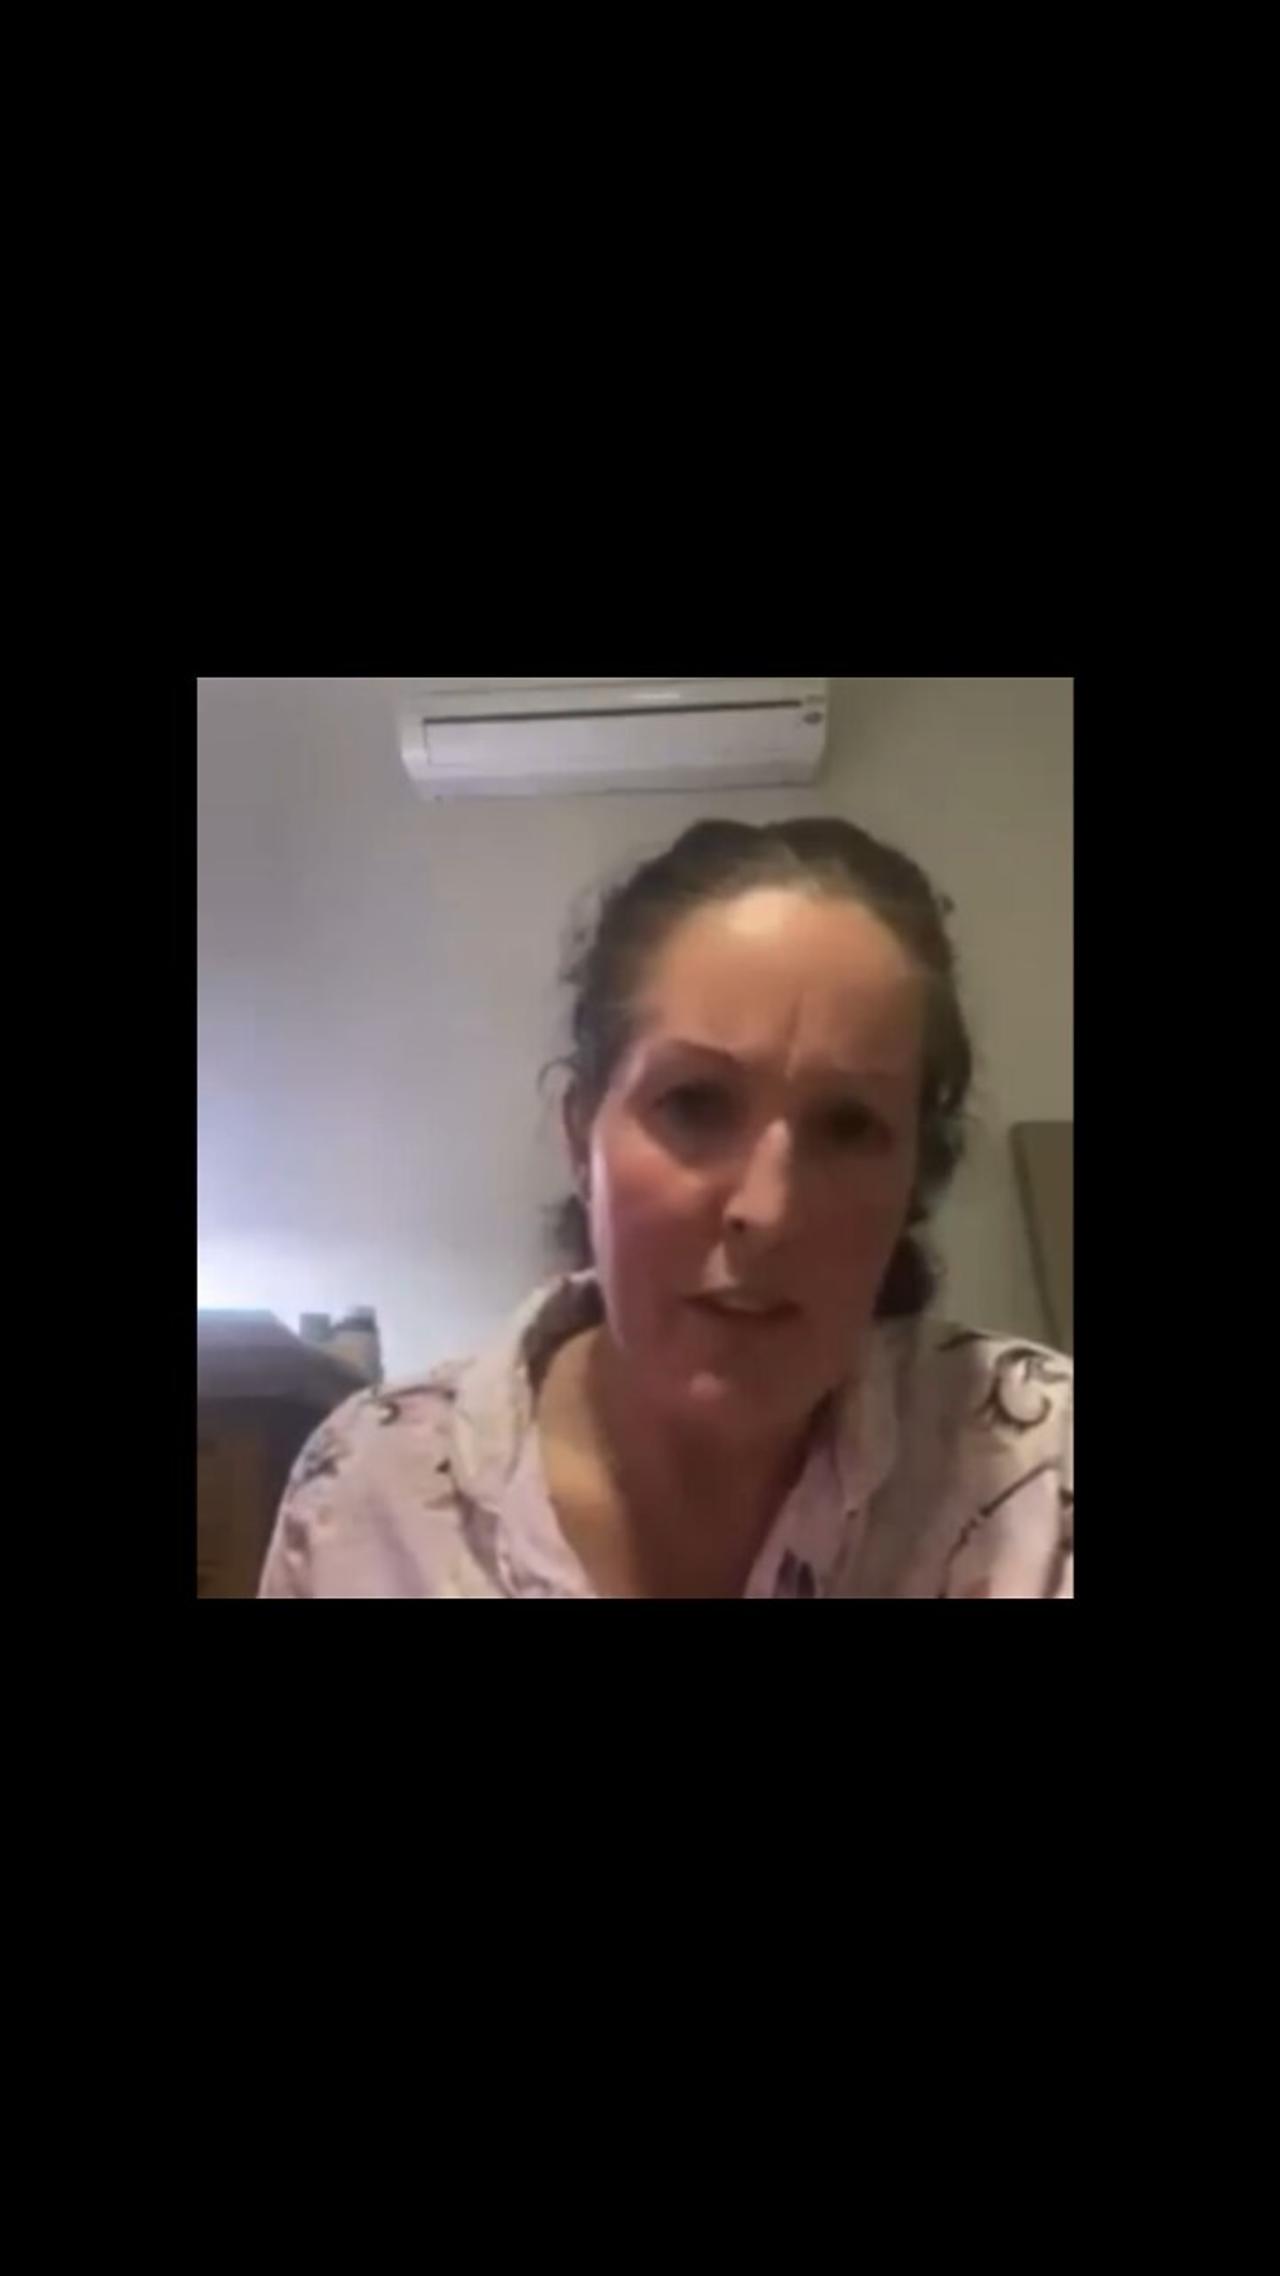 Karri 38 year old mother of one from Western Australia Pfizer vaccine injured